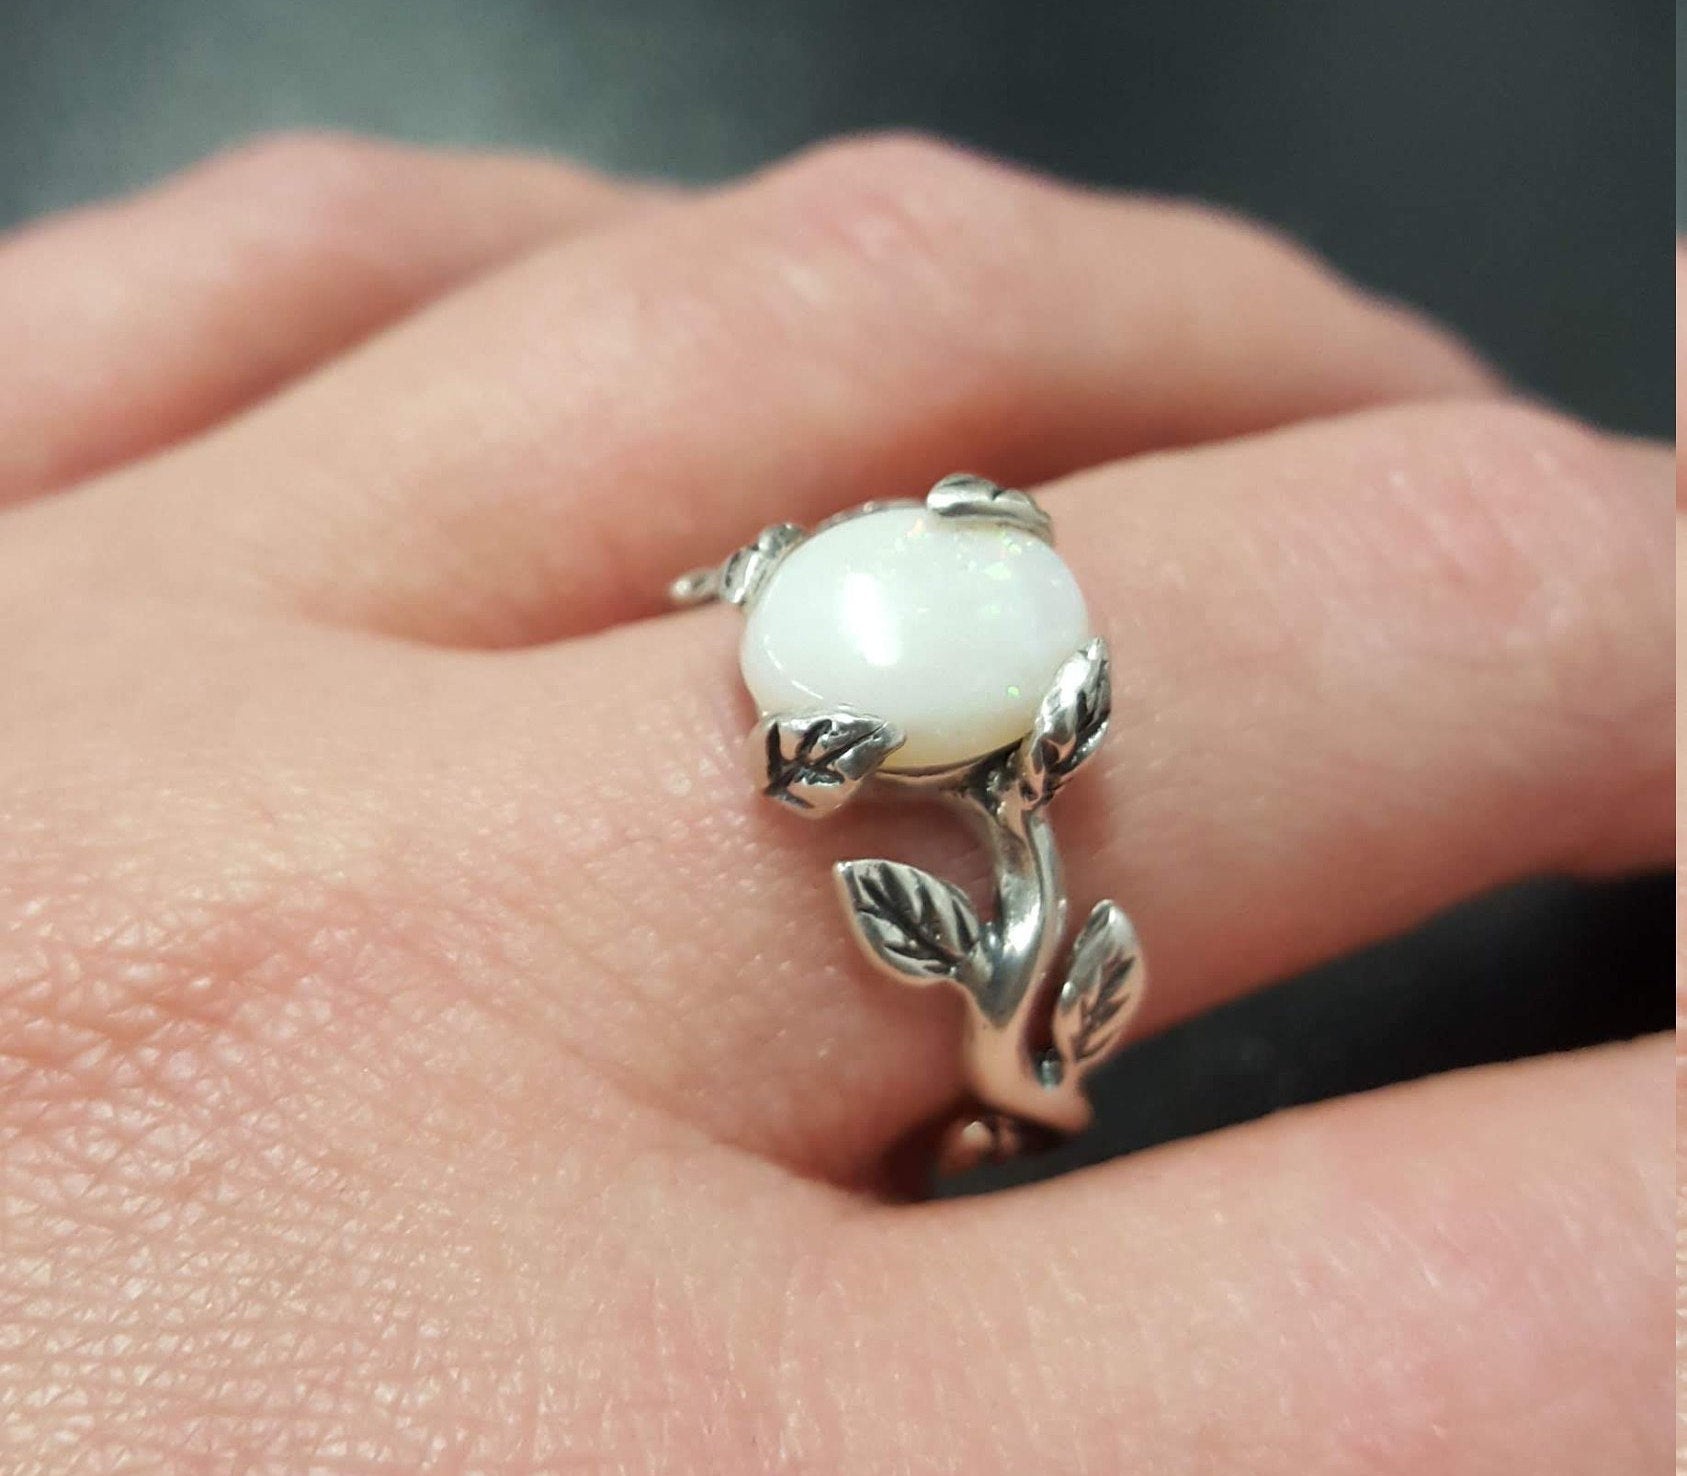 Fire Opal Ring, Natural Opal, Leaf Ring, Australian Opal Ring, Opal Ring, Branch Ring, White Rose Ring, Opal Flower Ring, Solid Silver Ring